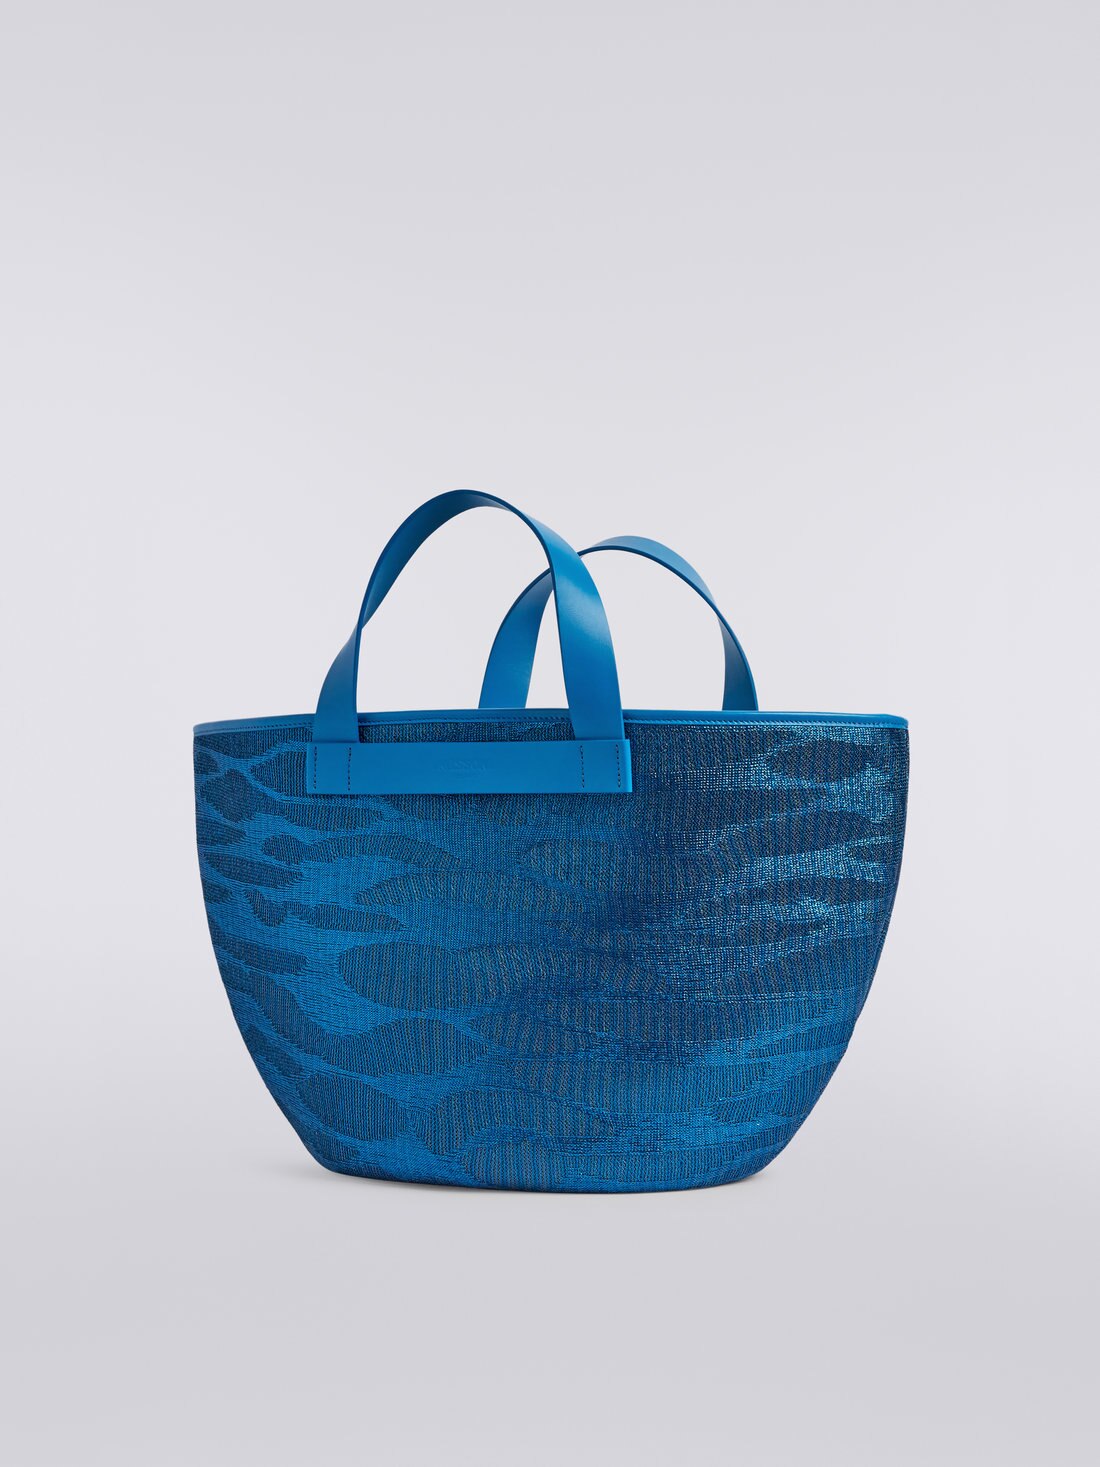 Jacquard viscose knit tote with leather handles, Blue - 8051575966187 - 1